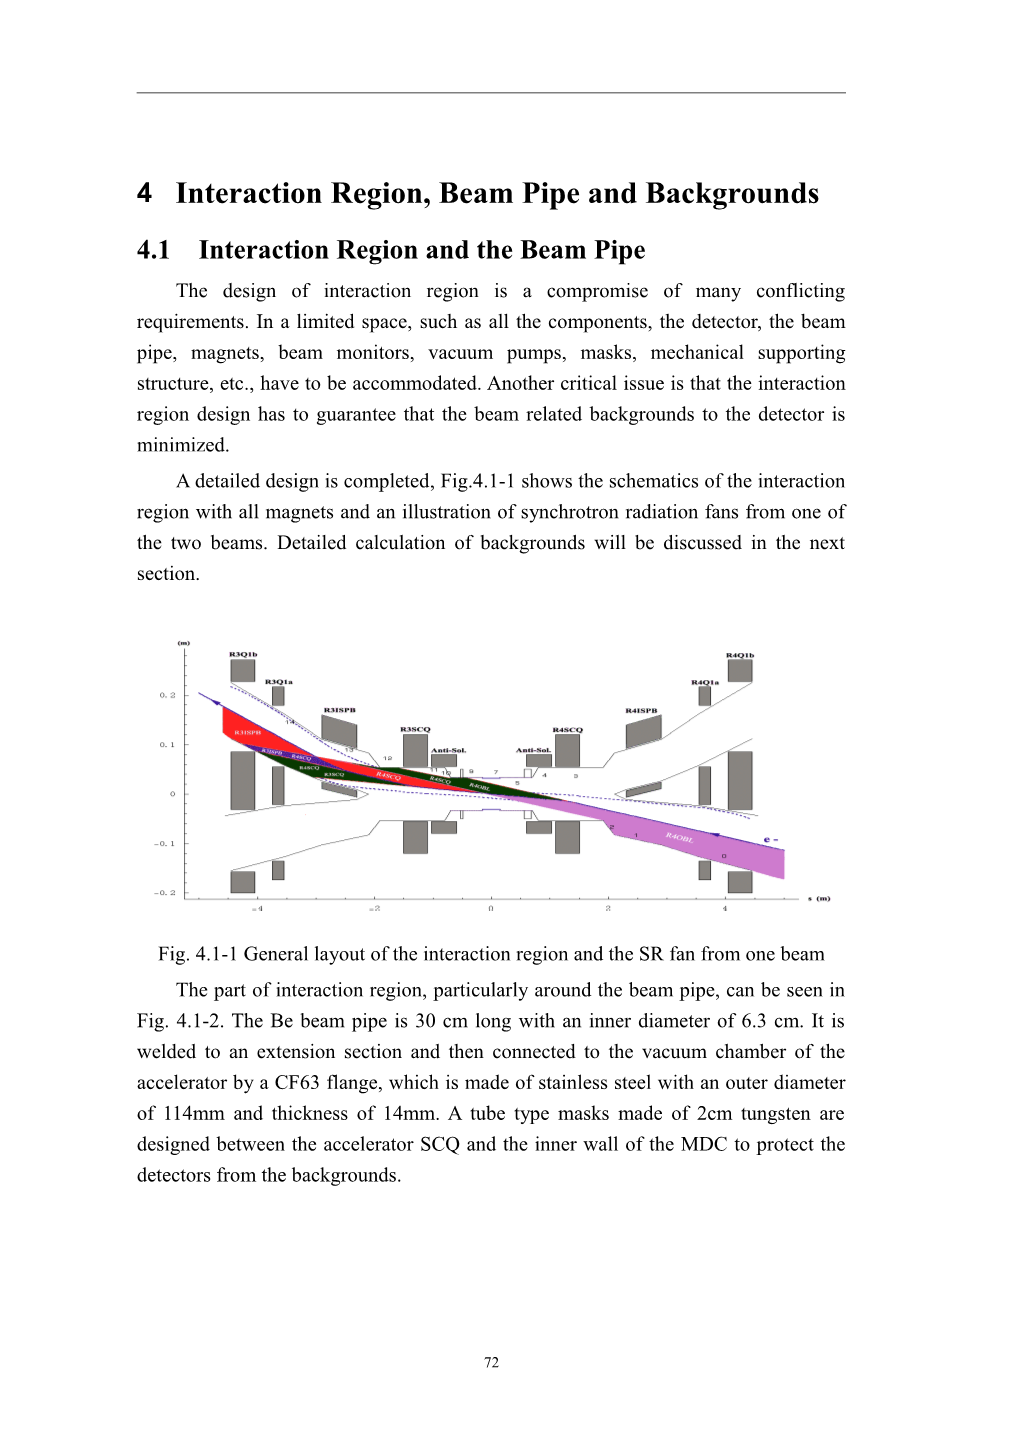 4Interaction Region, Beam Pipe and Backgrounds